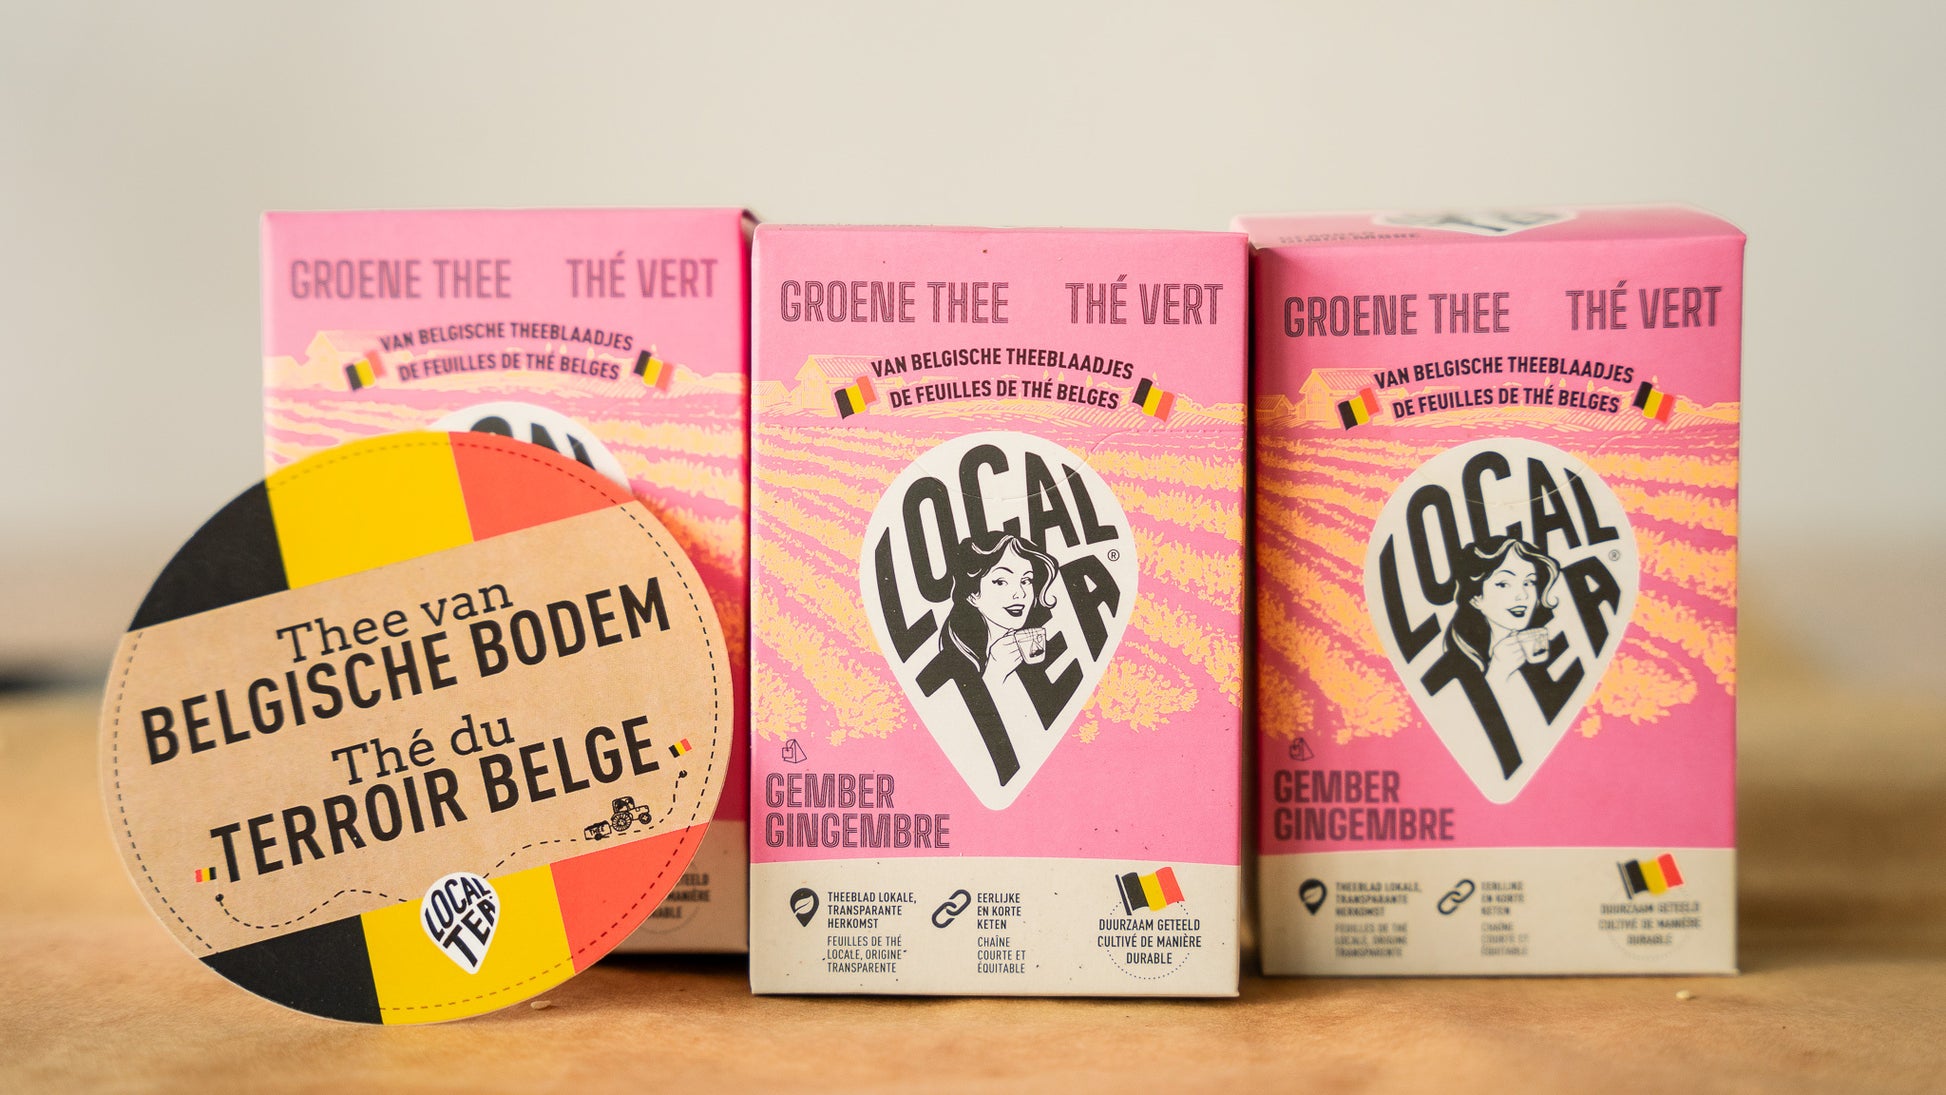 Three ginger-green tea packages placed next to each other with the writing "Tea from Belgian territory".